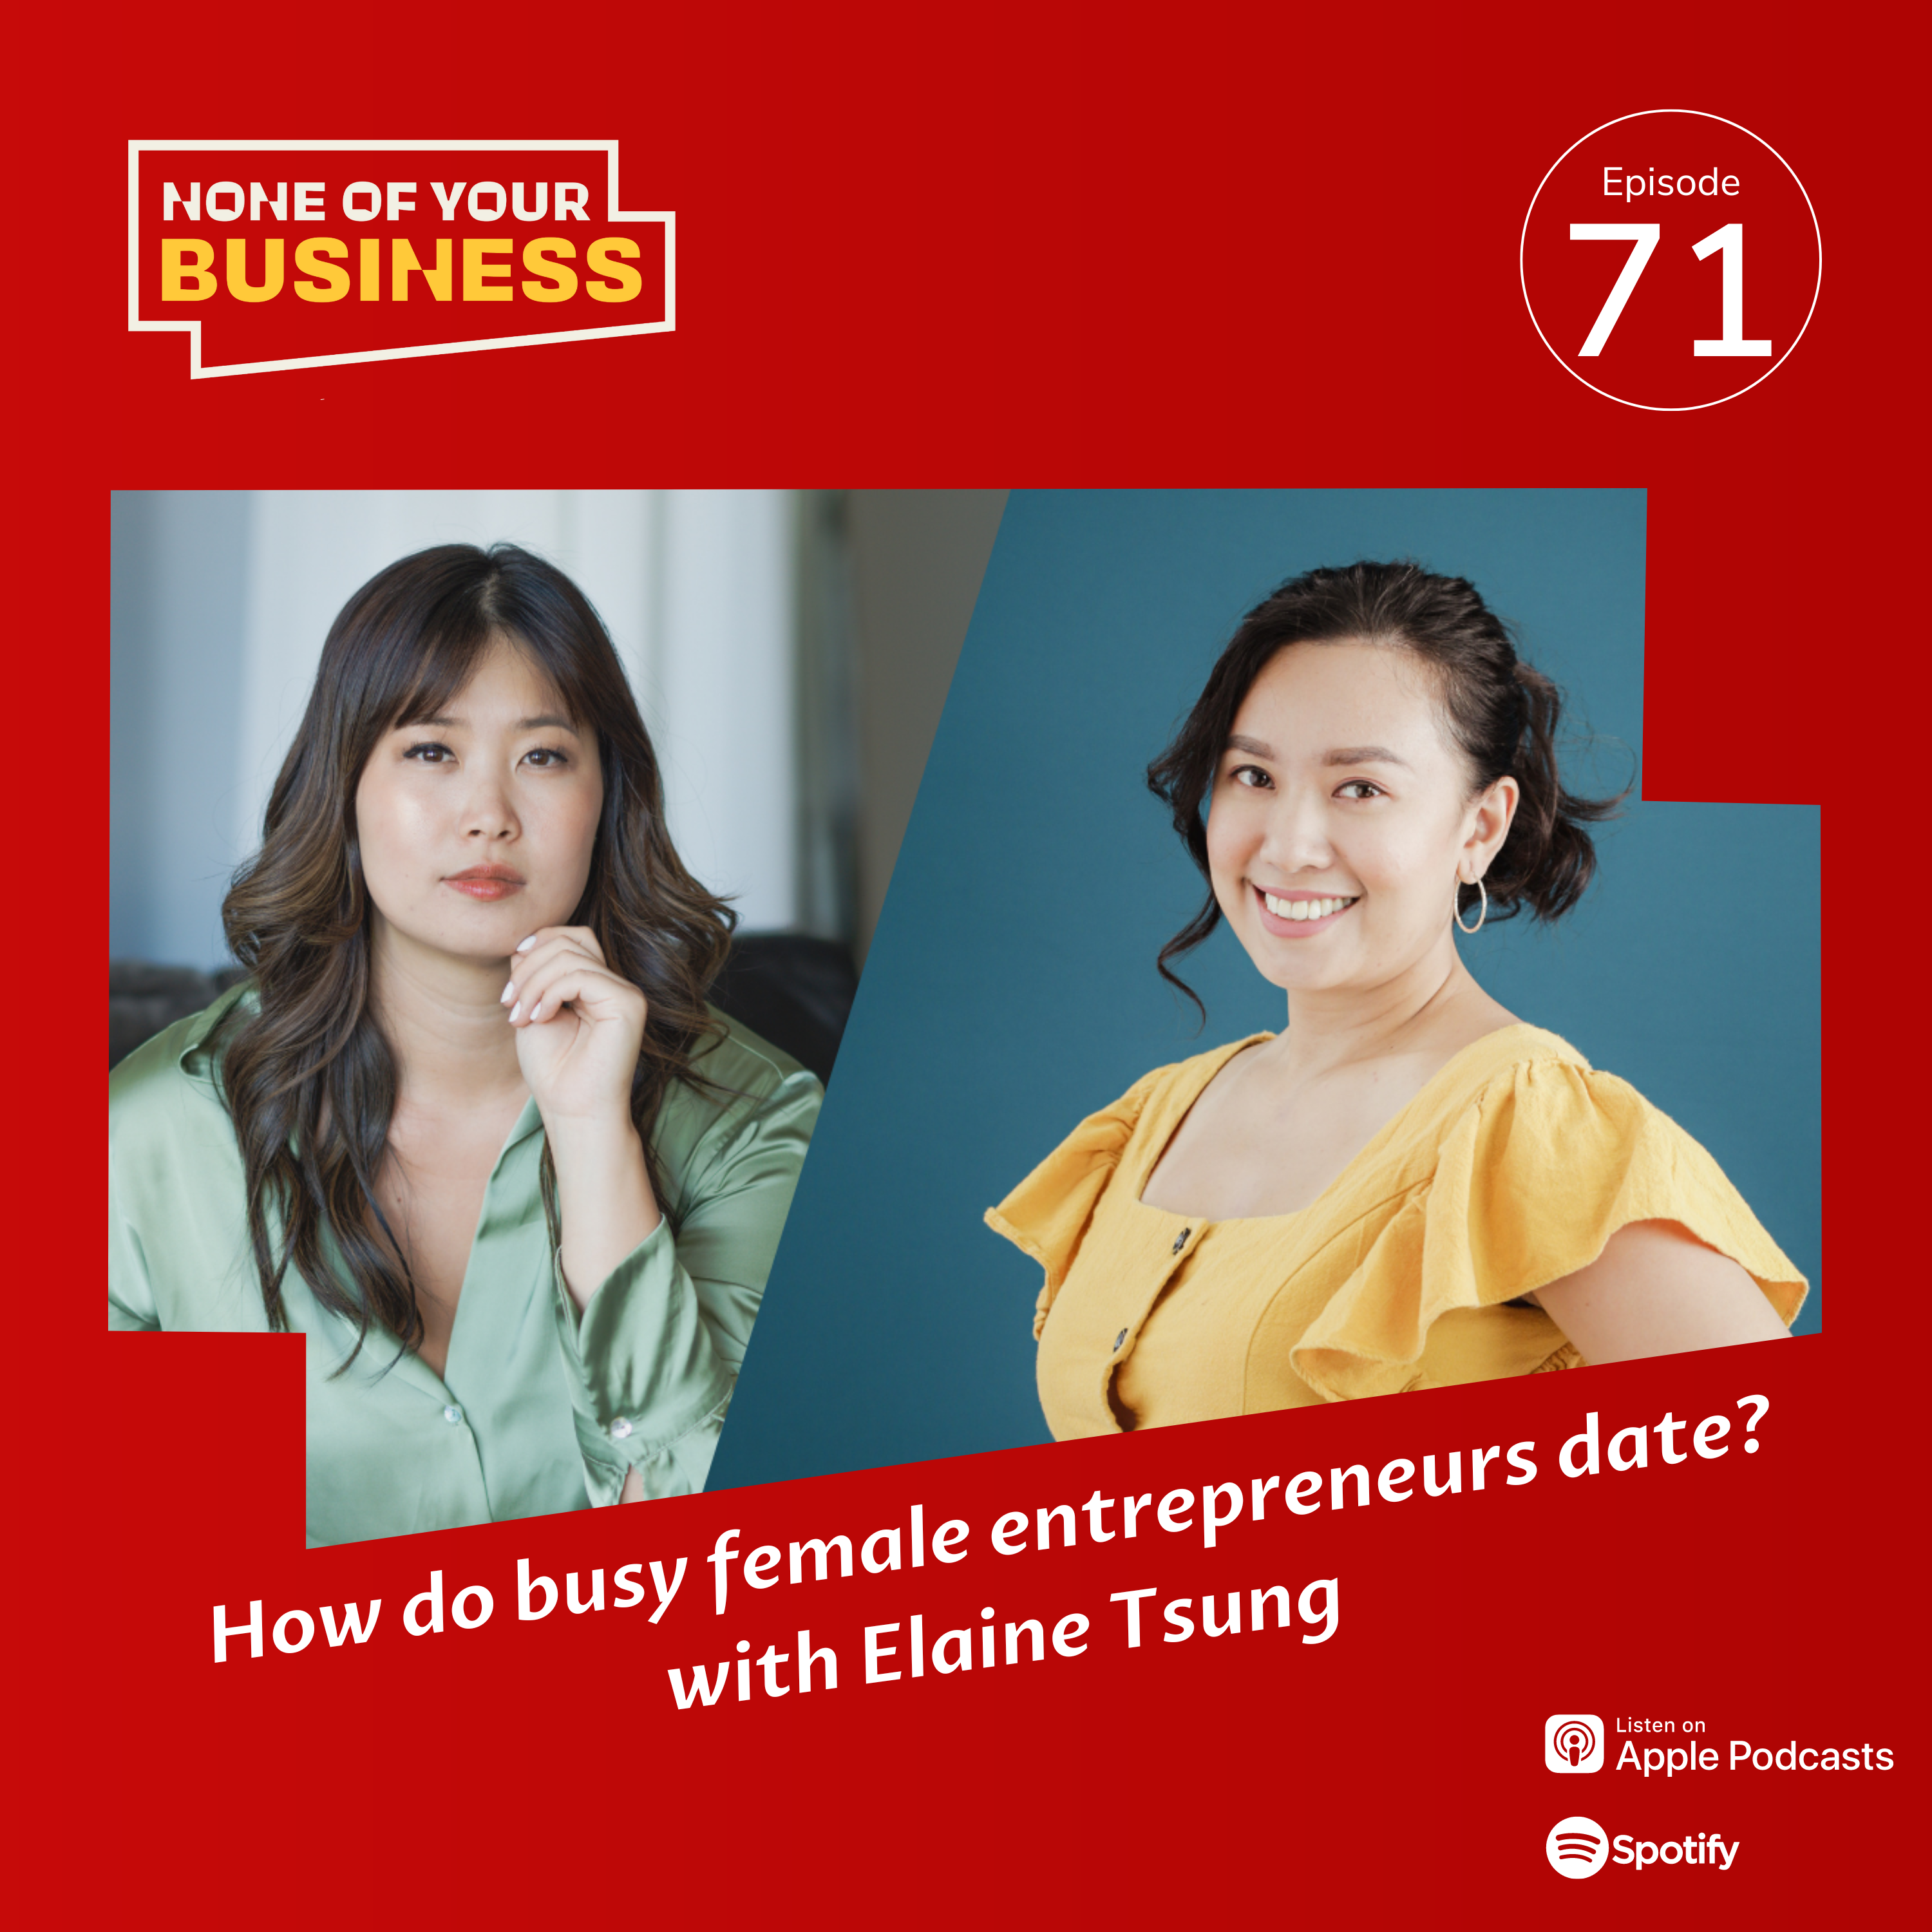 How do busy female entrepreneurs date? with Elaine Tsung